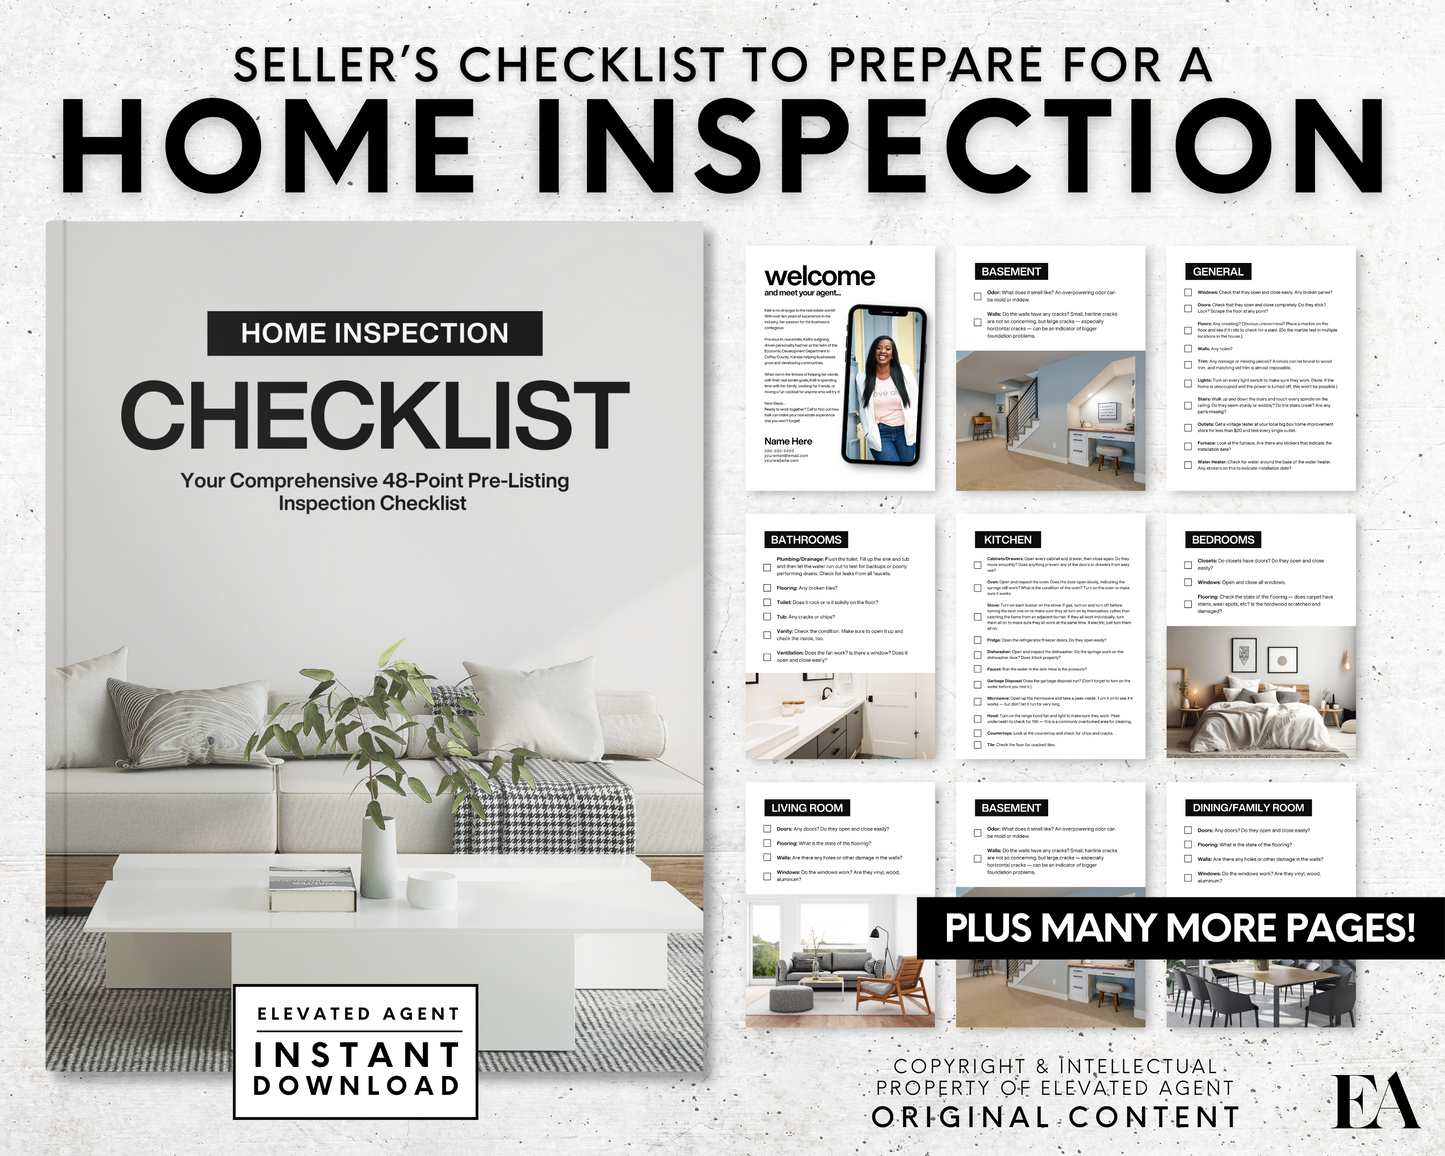 Home Inspection Checklist, Real Estate Template, Property Survey Checklist, Real Estate Marketing, Home Buyer Packet, Real Estate Flyer